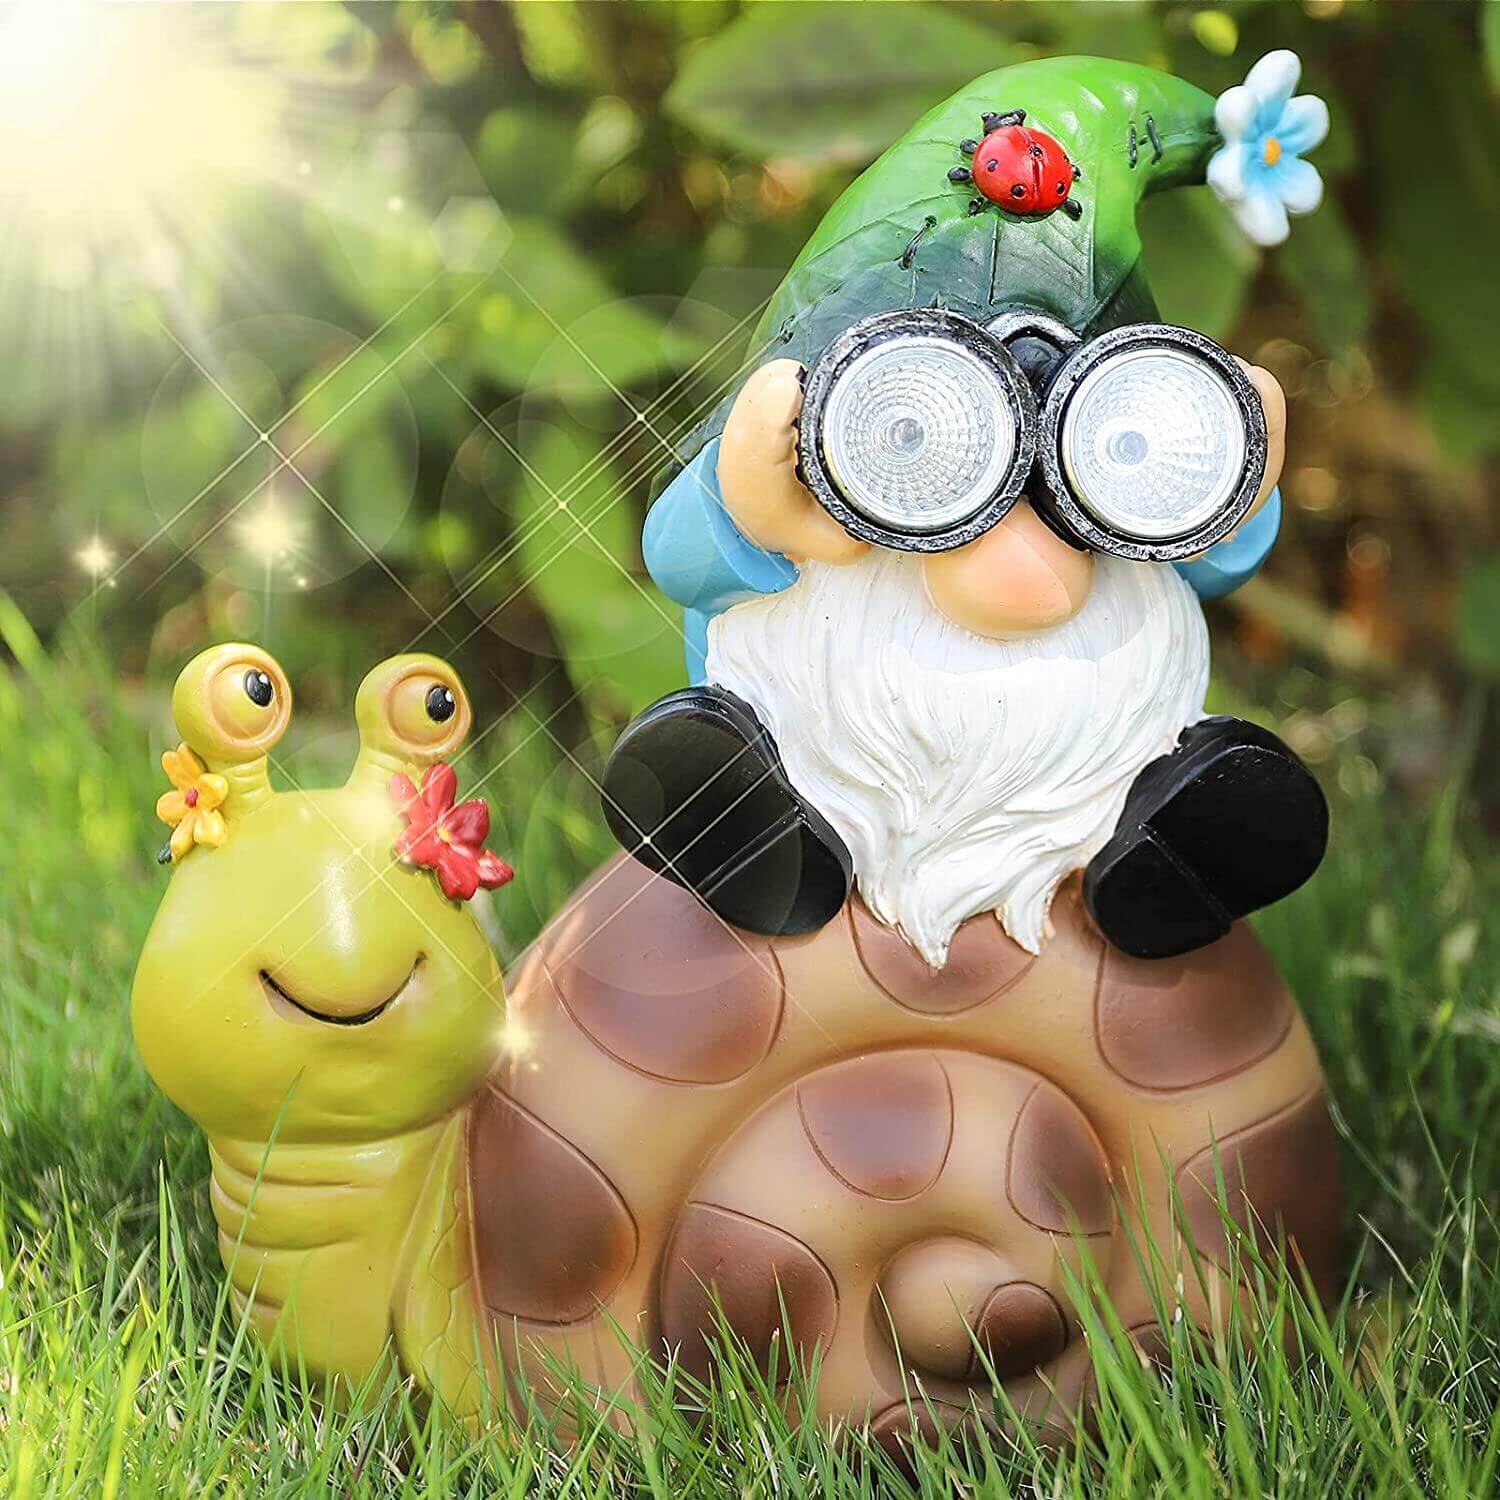 Beauare Resin Garden Gnome Snail Statue Decor with Solar LED Lights